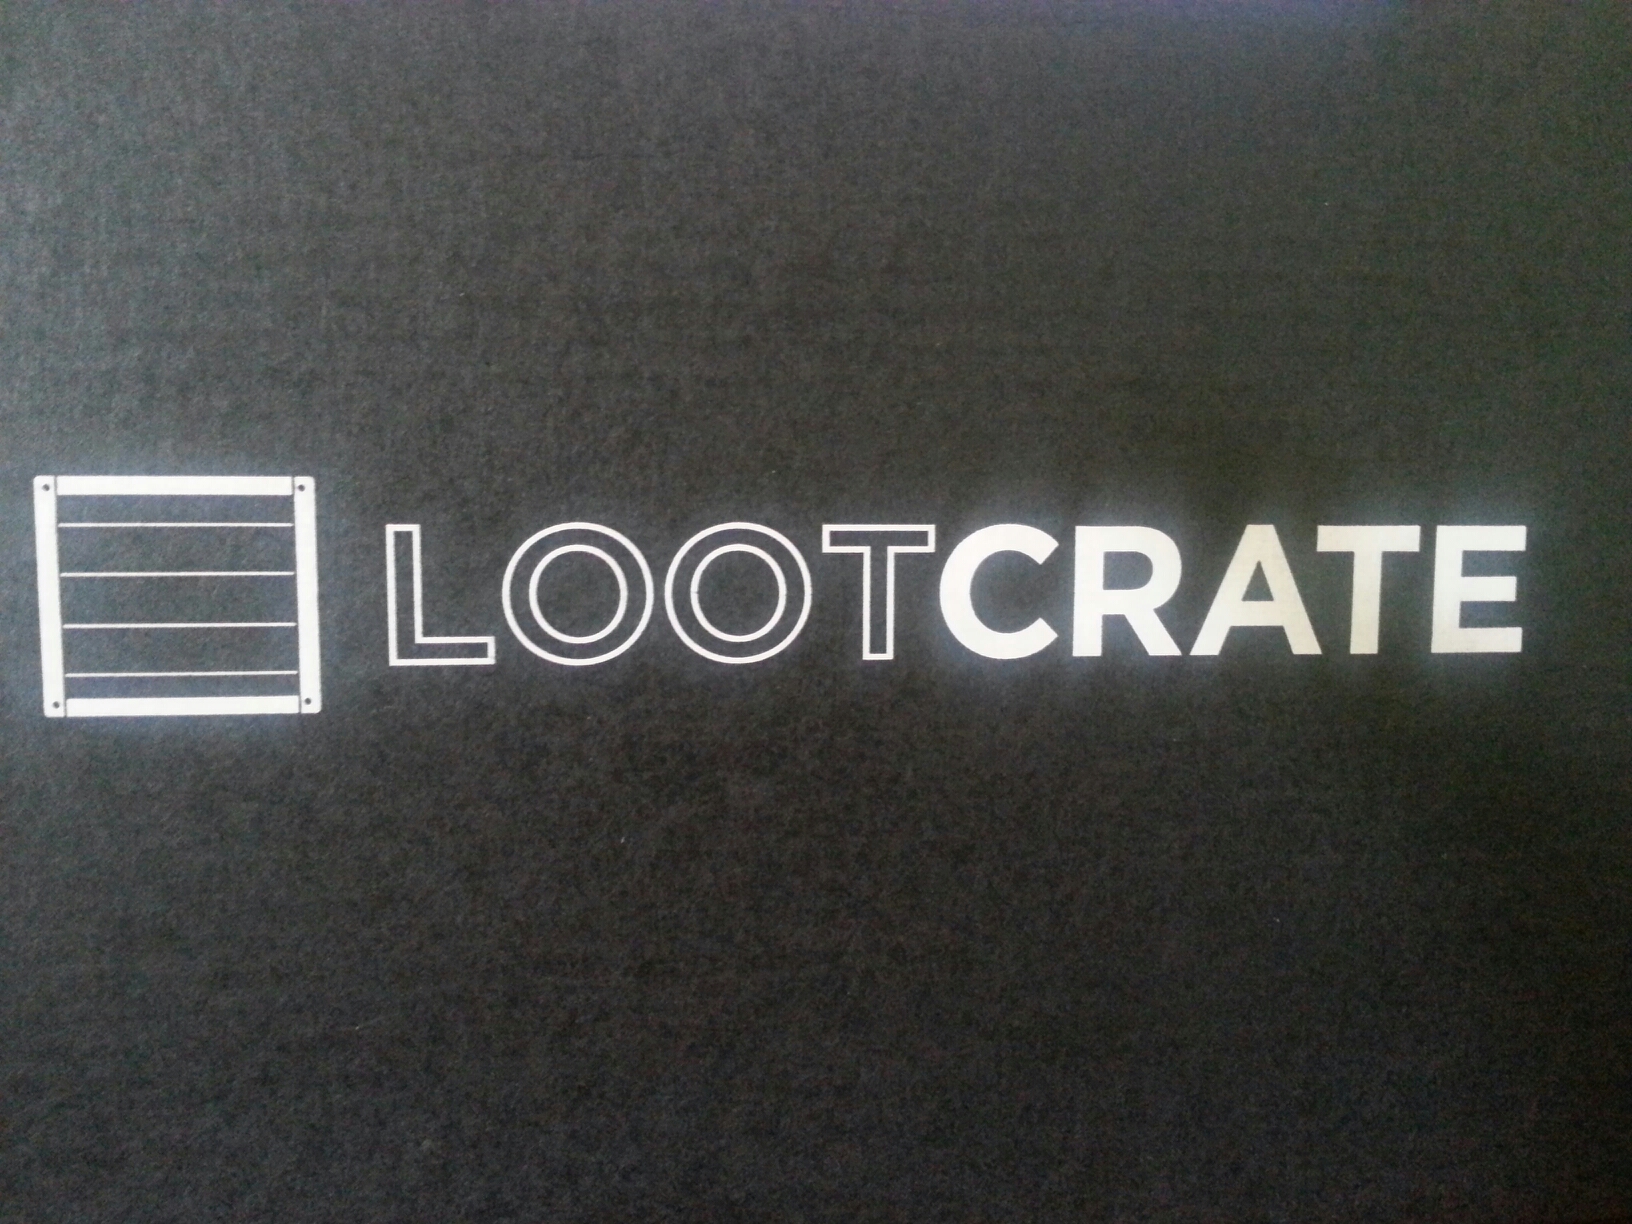 Loot crate april 2015: the ultimate subscription unboxing